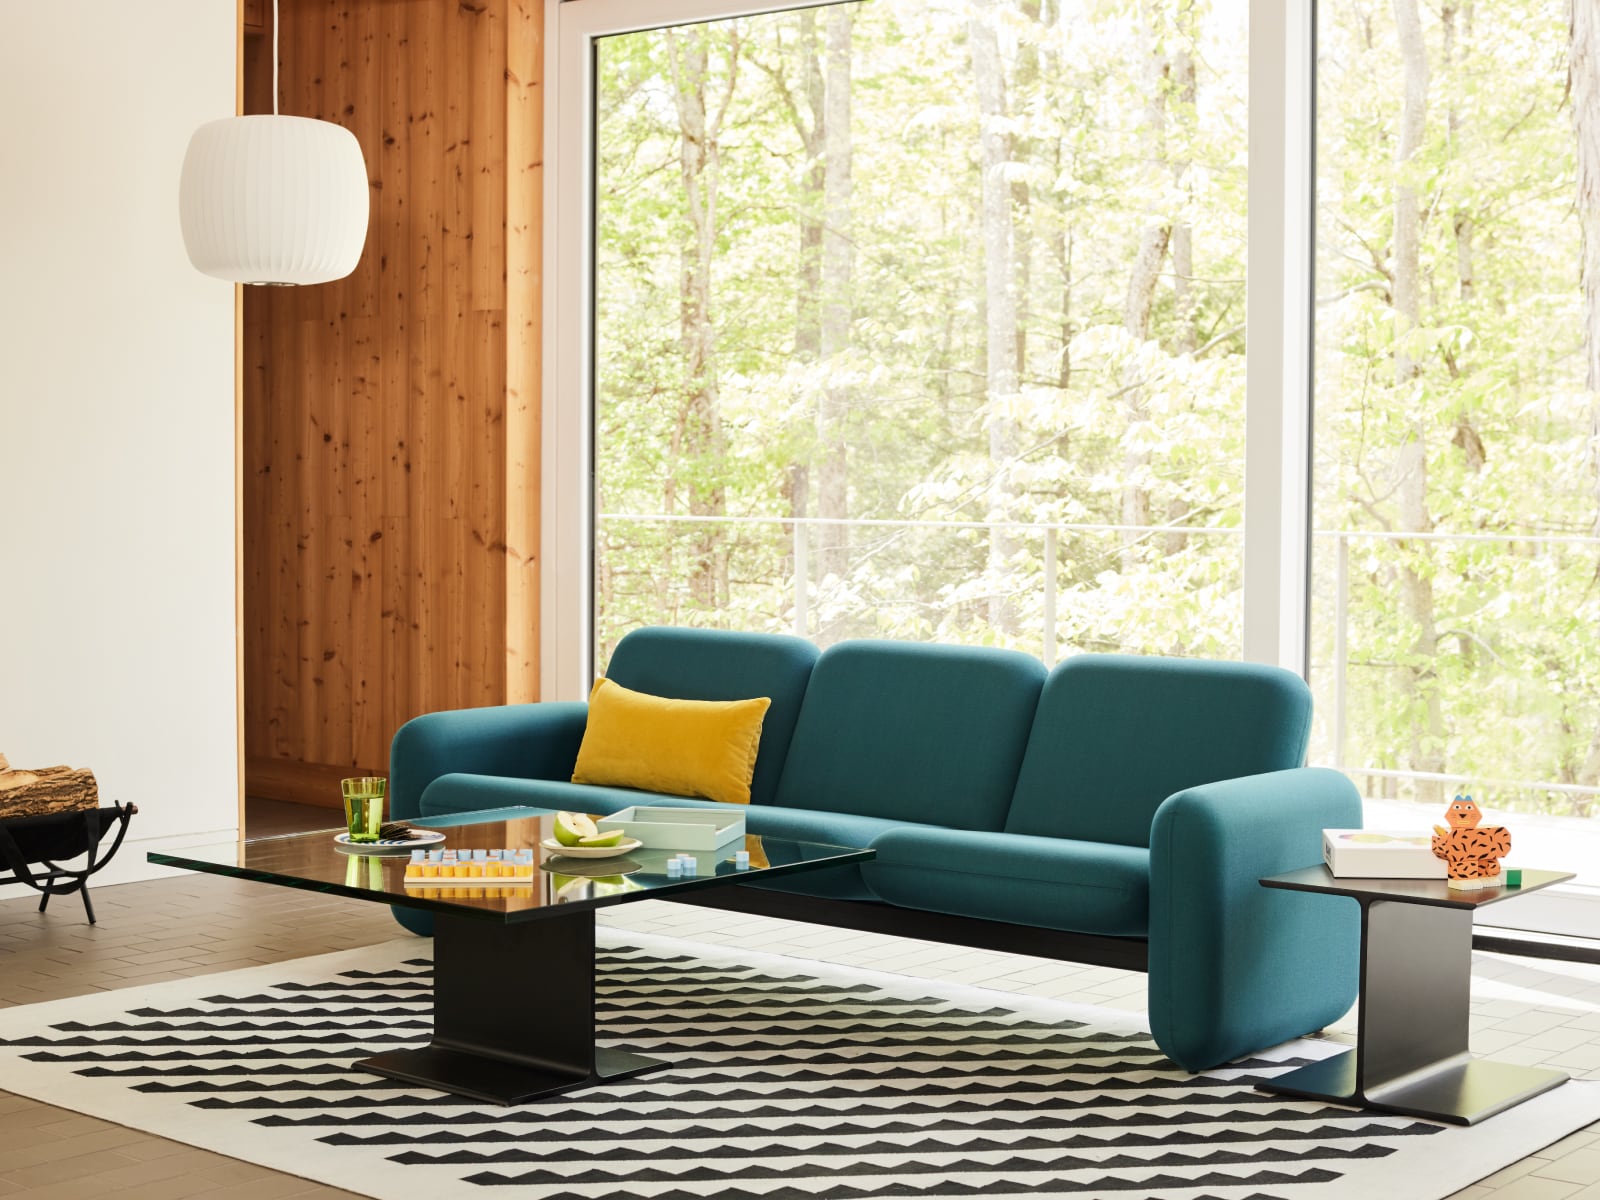 A Wilkes Modular Sofa and I Beam Tables in a living room.